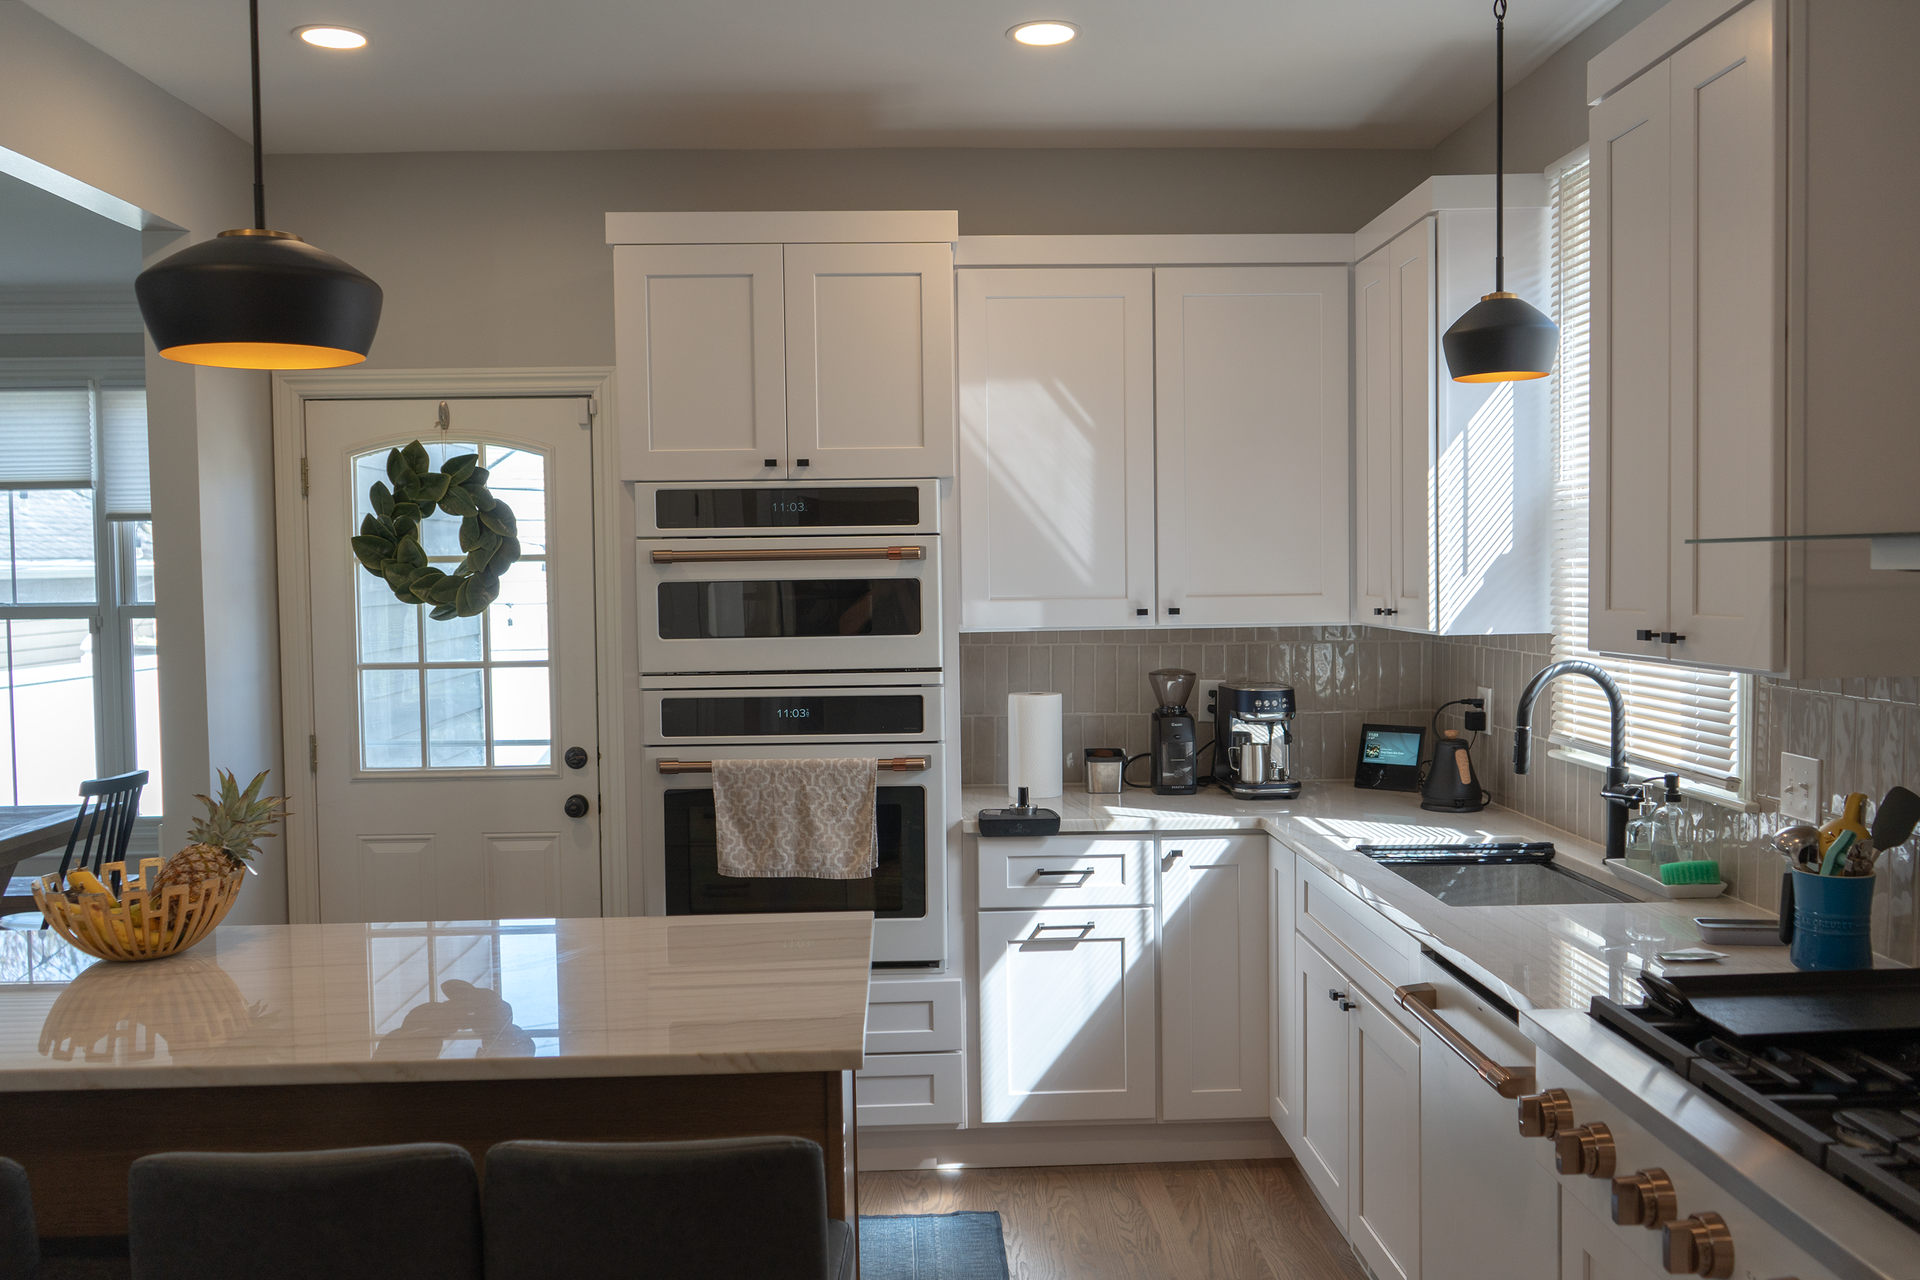 A kitchen with white cabinets and a large island in the middle.